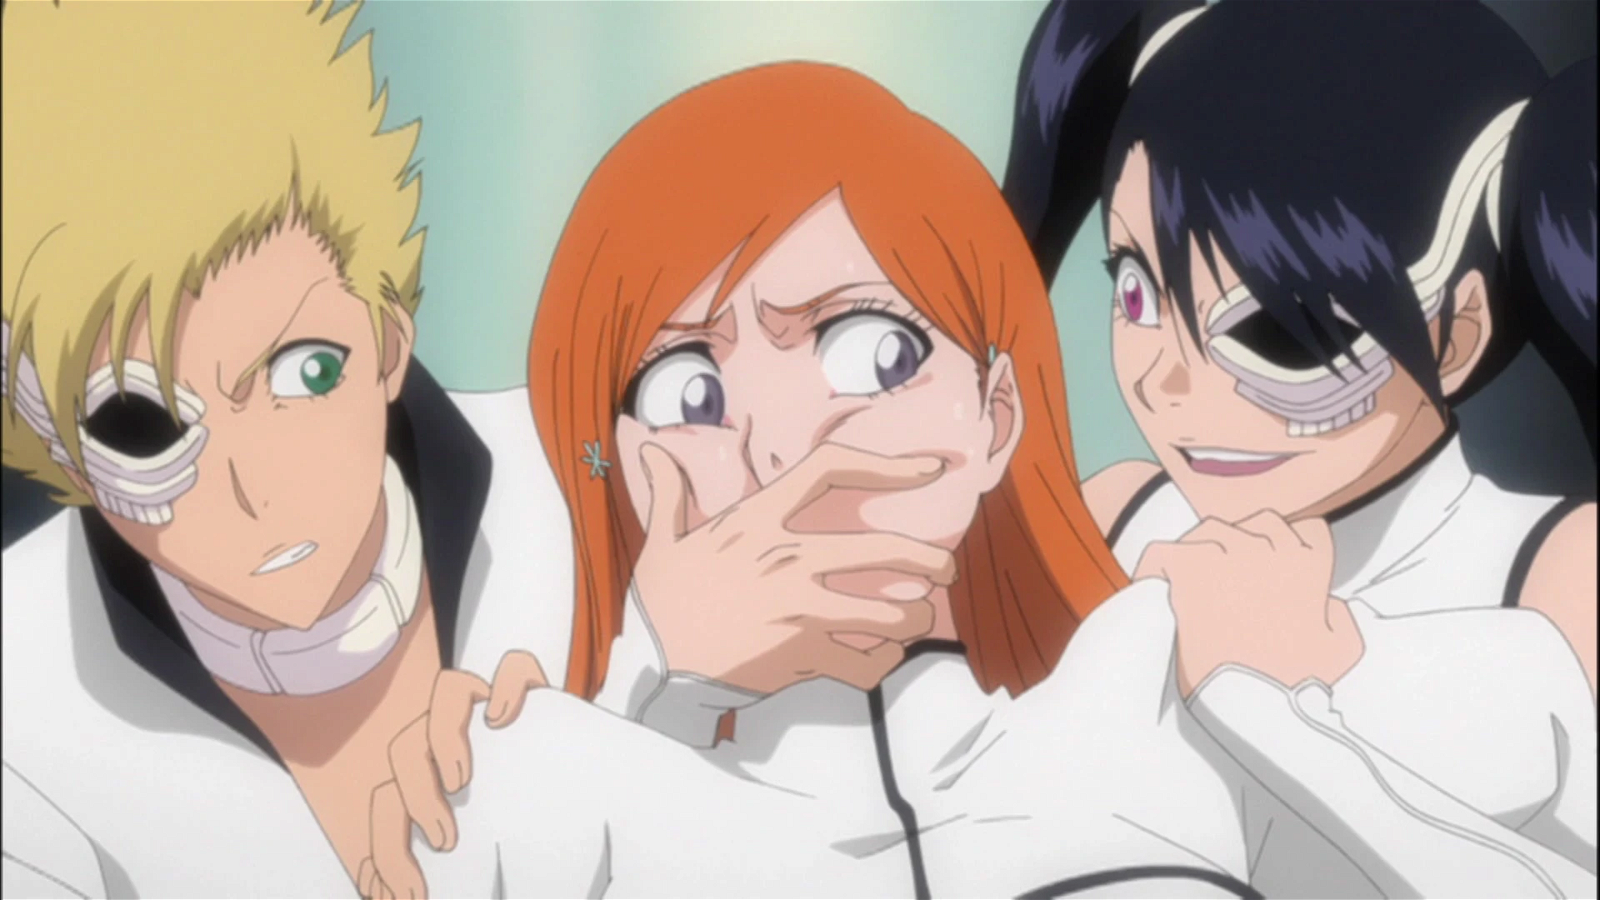 orihime getting tortured